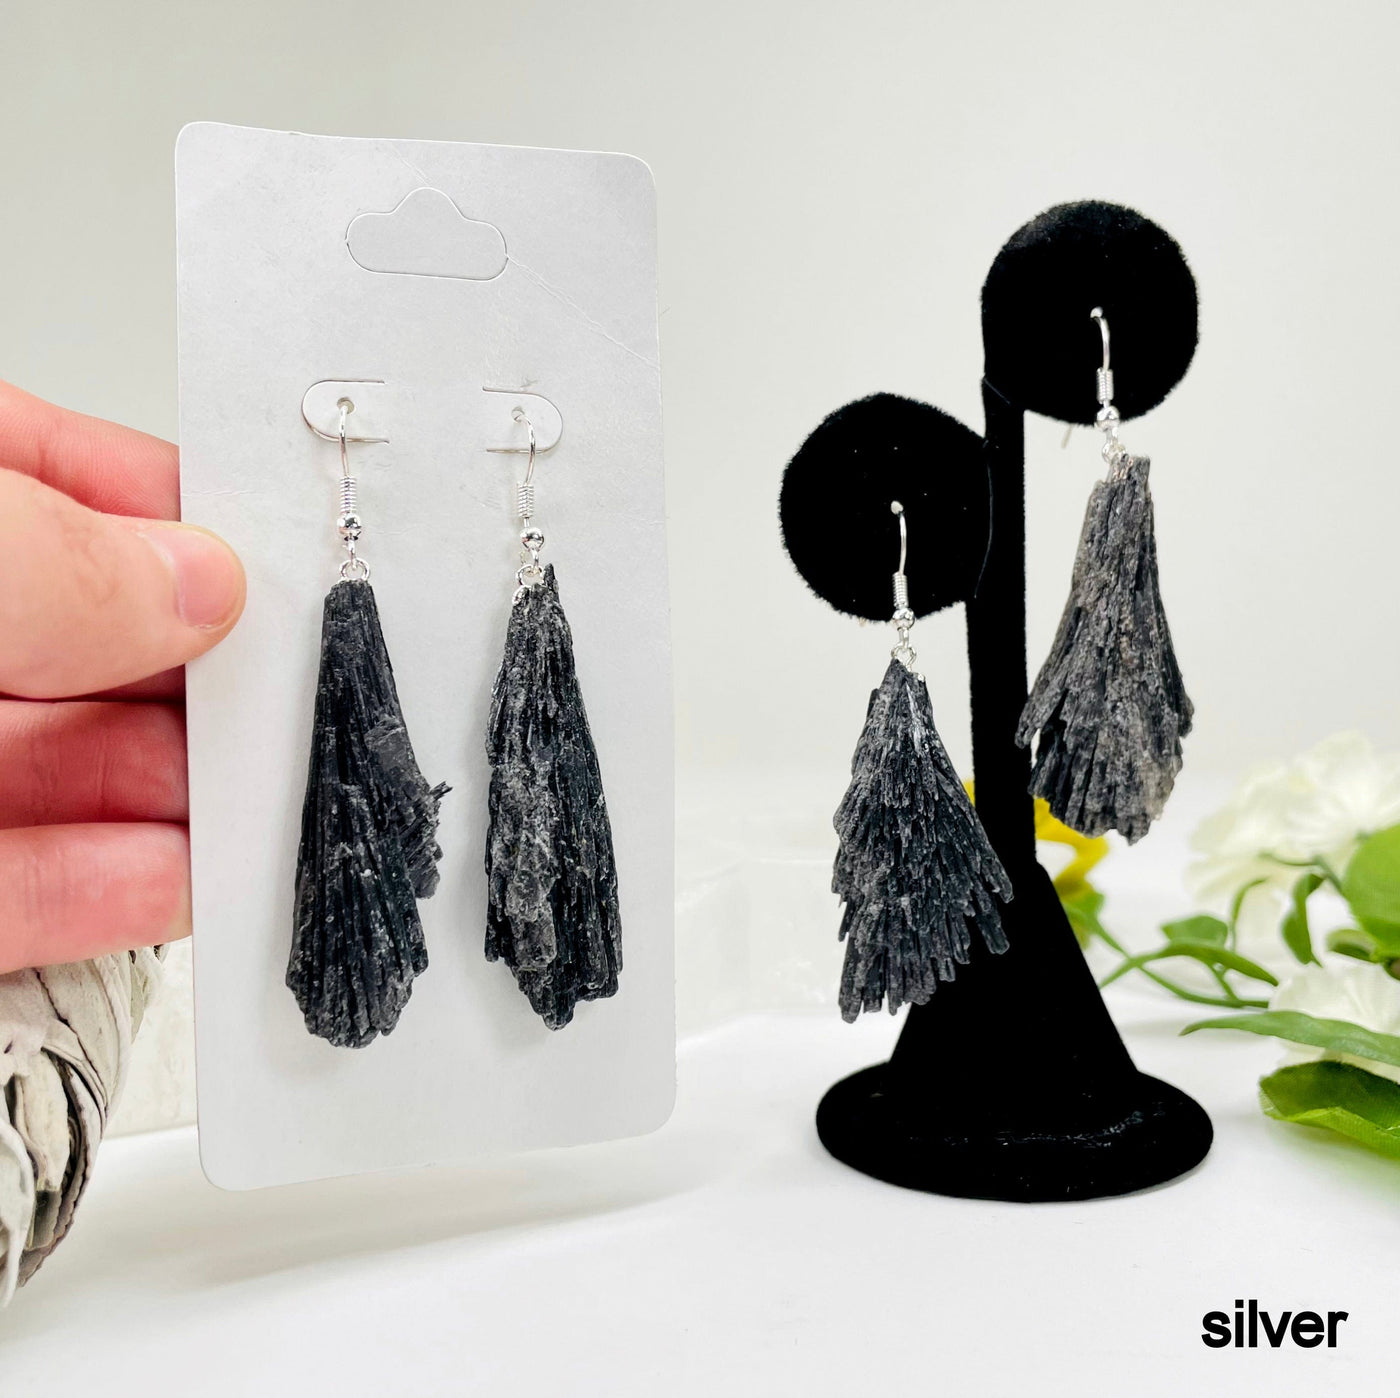 one silver black kyanite fan dangle earring pair on earring display and a second one in its packaging in hand for possible variations